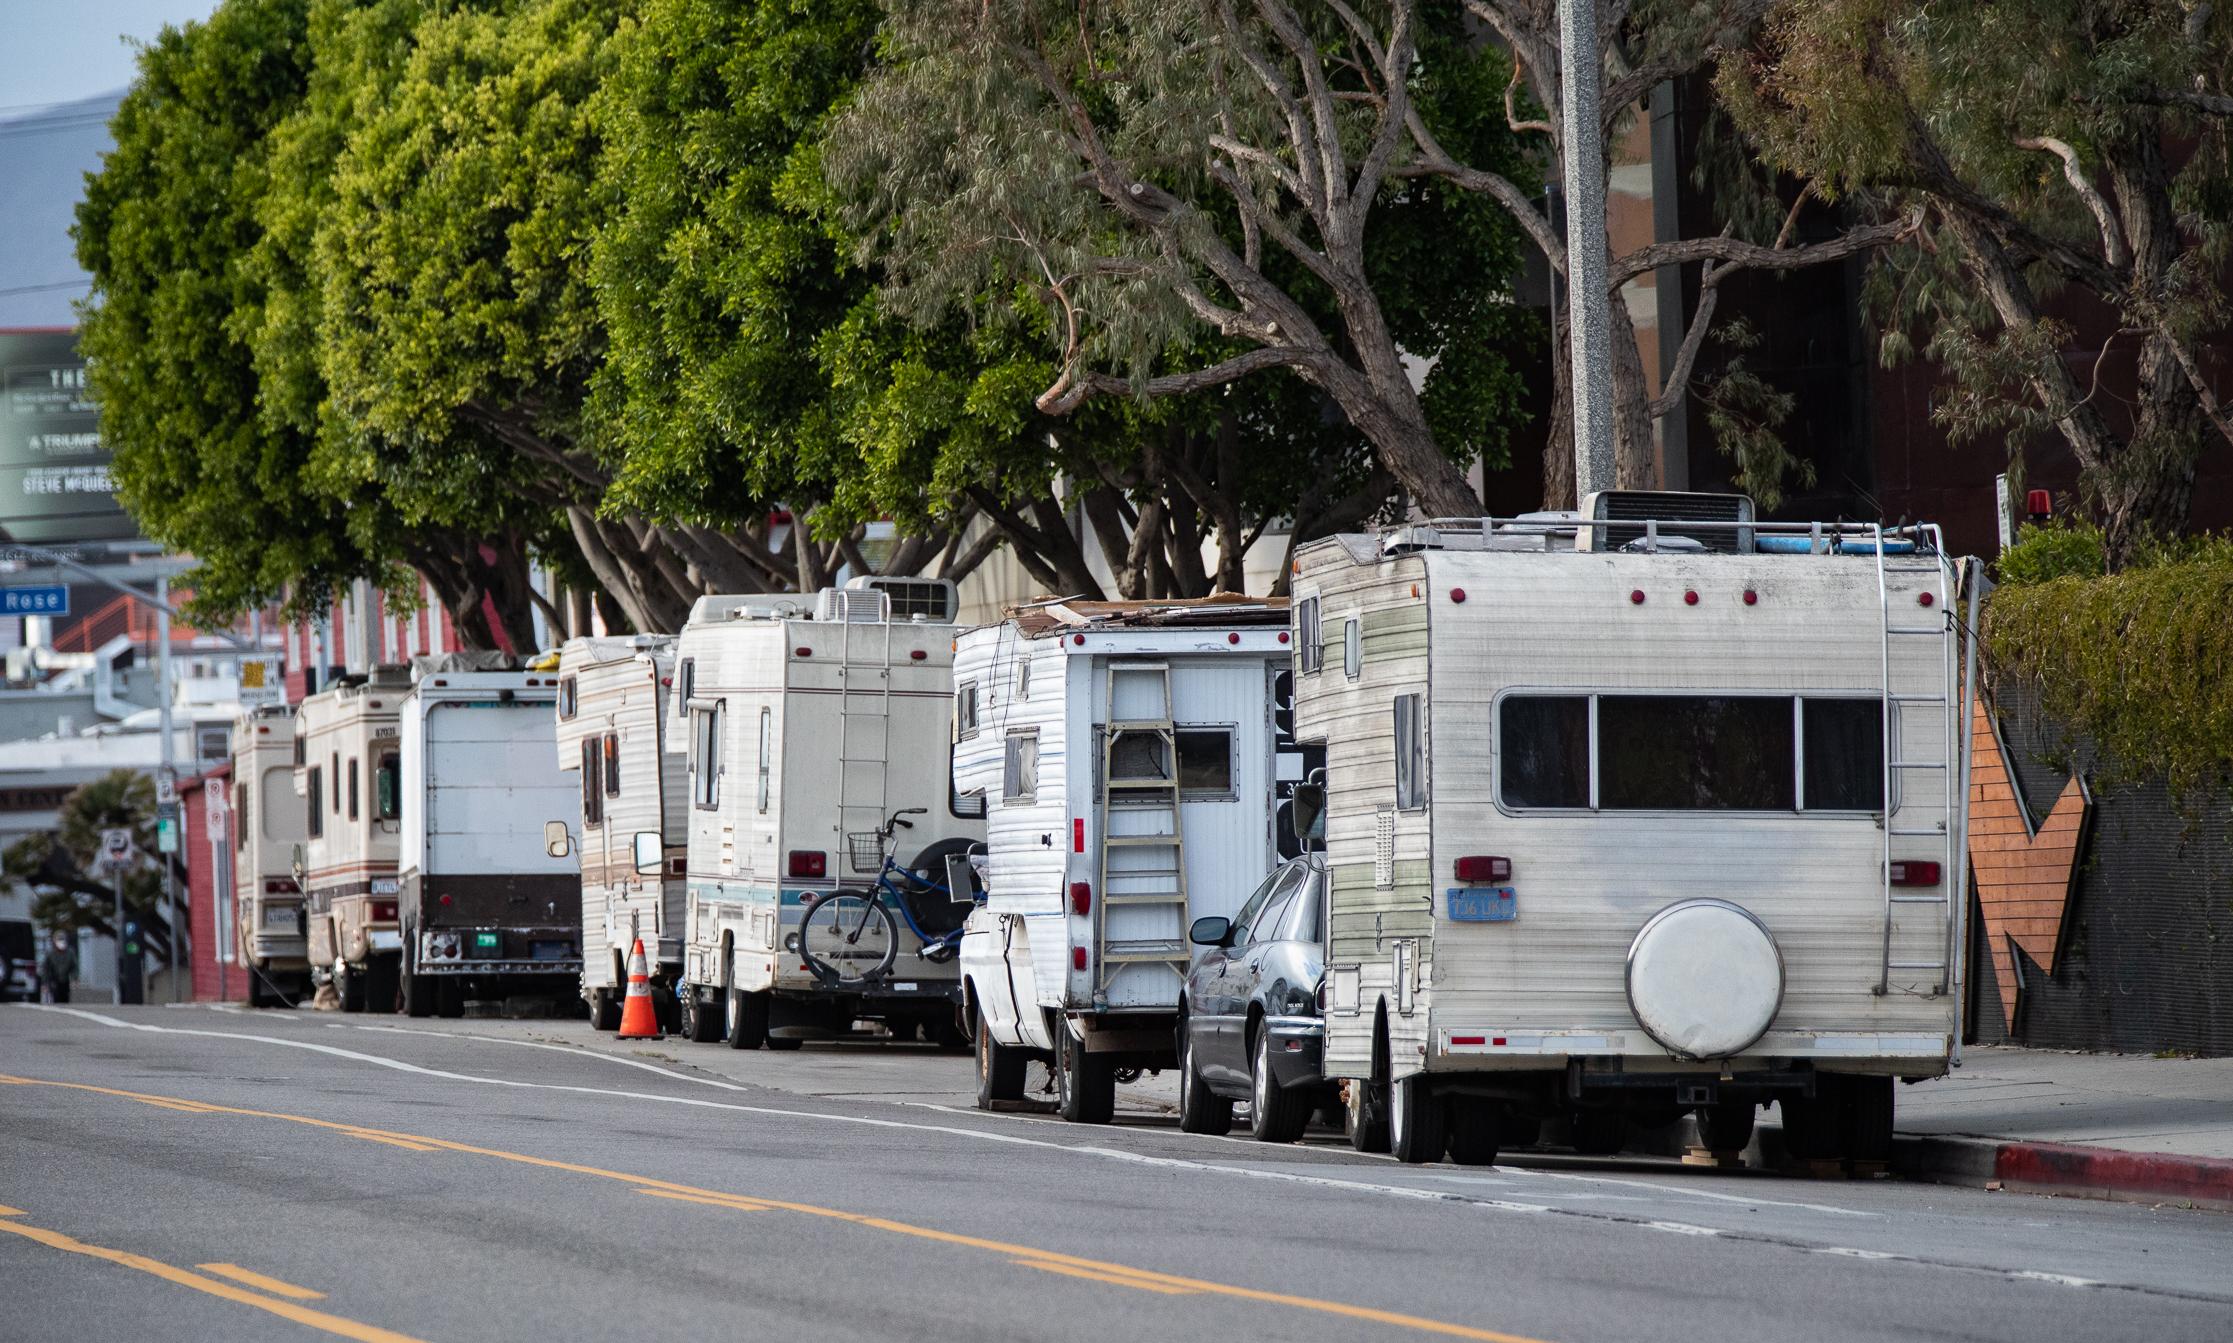 RVs Can Park Overnight Once Again in Fullerton